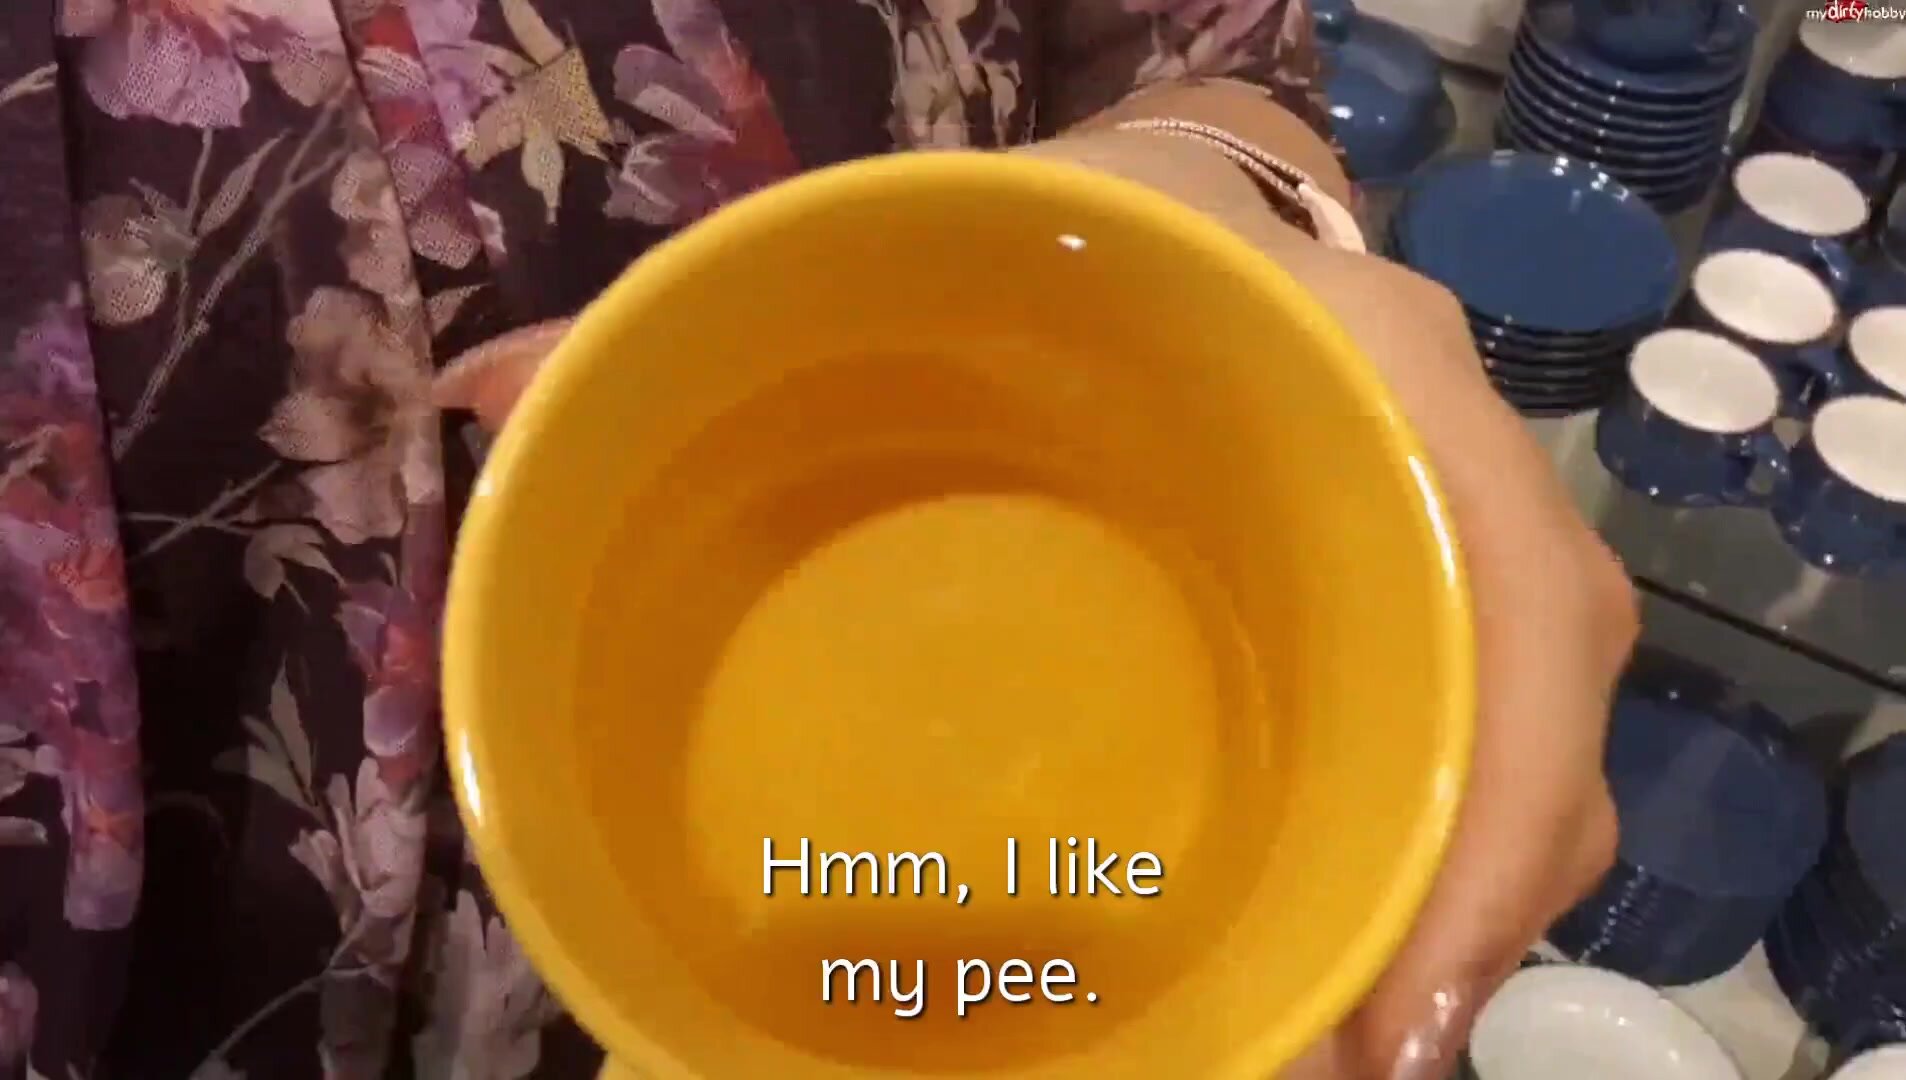 *Subtitled* German pissing in a mug and leaving it